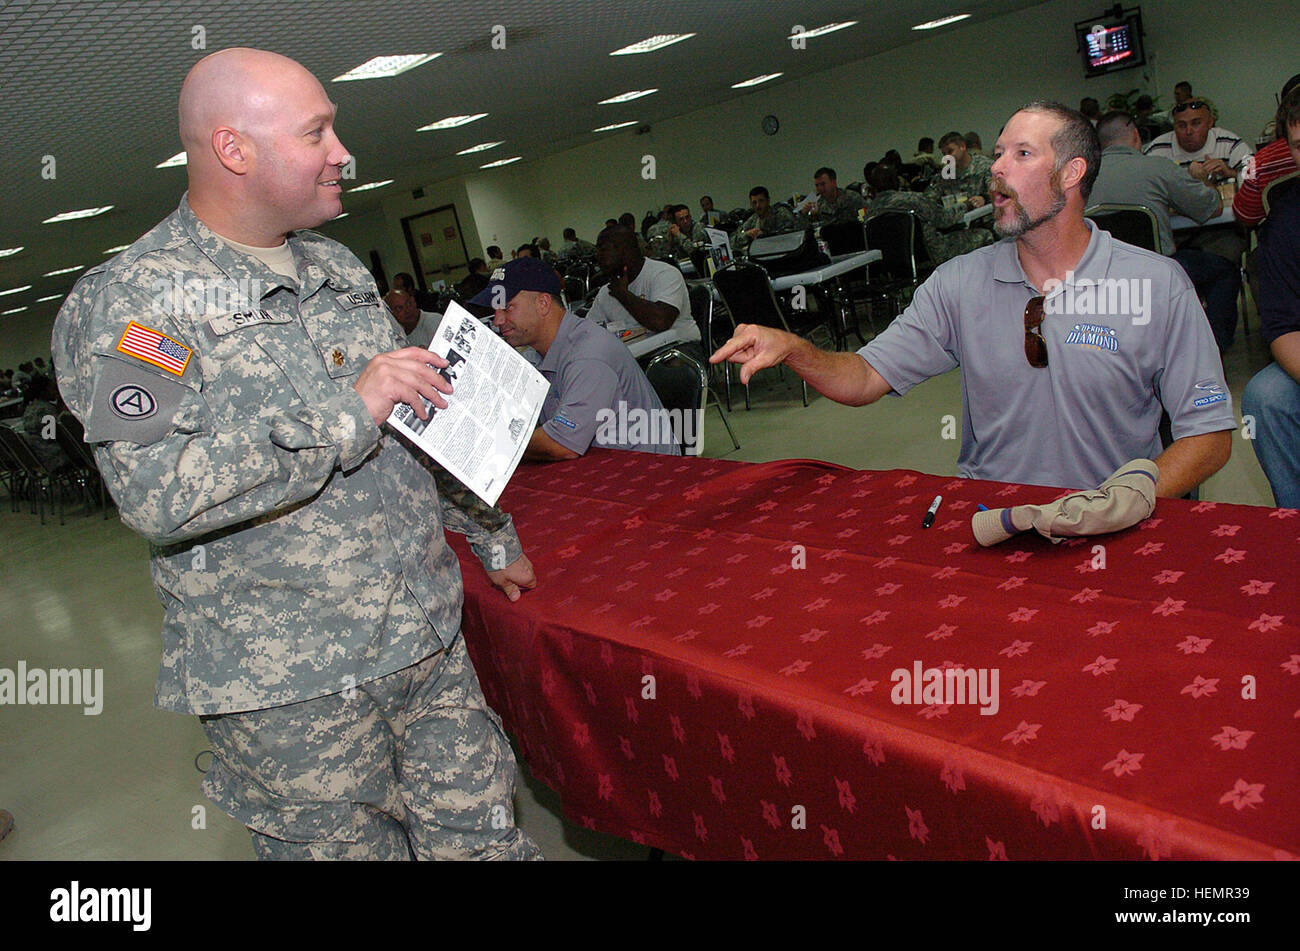 “I grew up watching the White Sox,” said U.S. Army Maj. Todd Smith, from Springfield, Ill., to Jack McDowell, a retired Major League Baseball pitcher, at Camp As Sayliyah in Qatar on Sept. 27, 2007. McDowell’s 13-year Major League Baseball tour began with the Chicago White Sox. In 1993, he won the American League’s Cy Young Award as the most outstanding pitcher. Smith brought up old memories during the pitcher’s legendary career. Jack McDowell Qatar Stock Photo